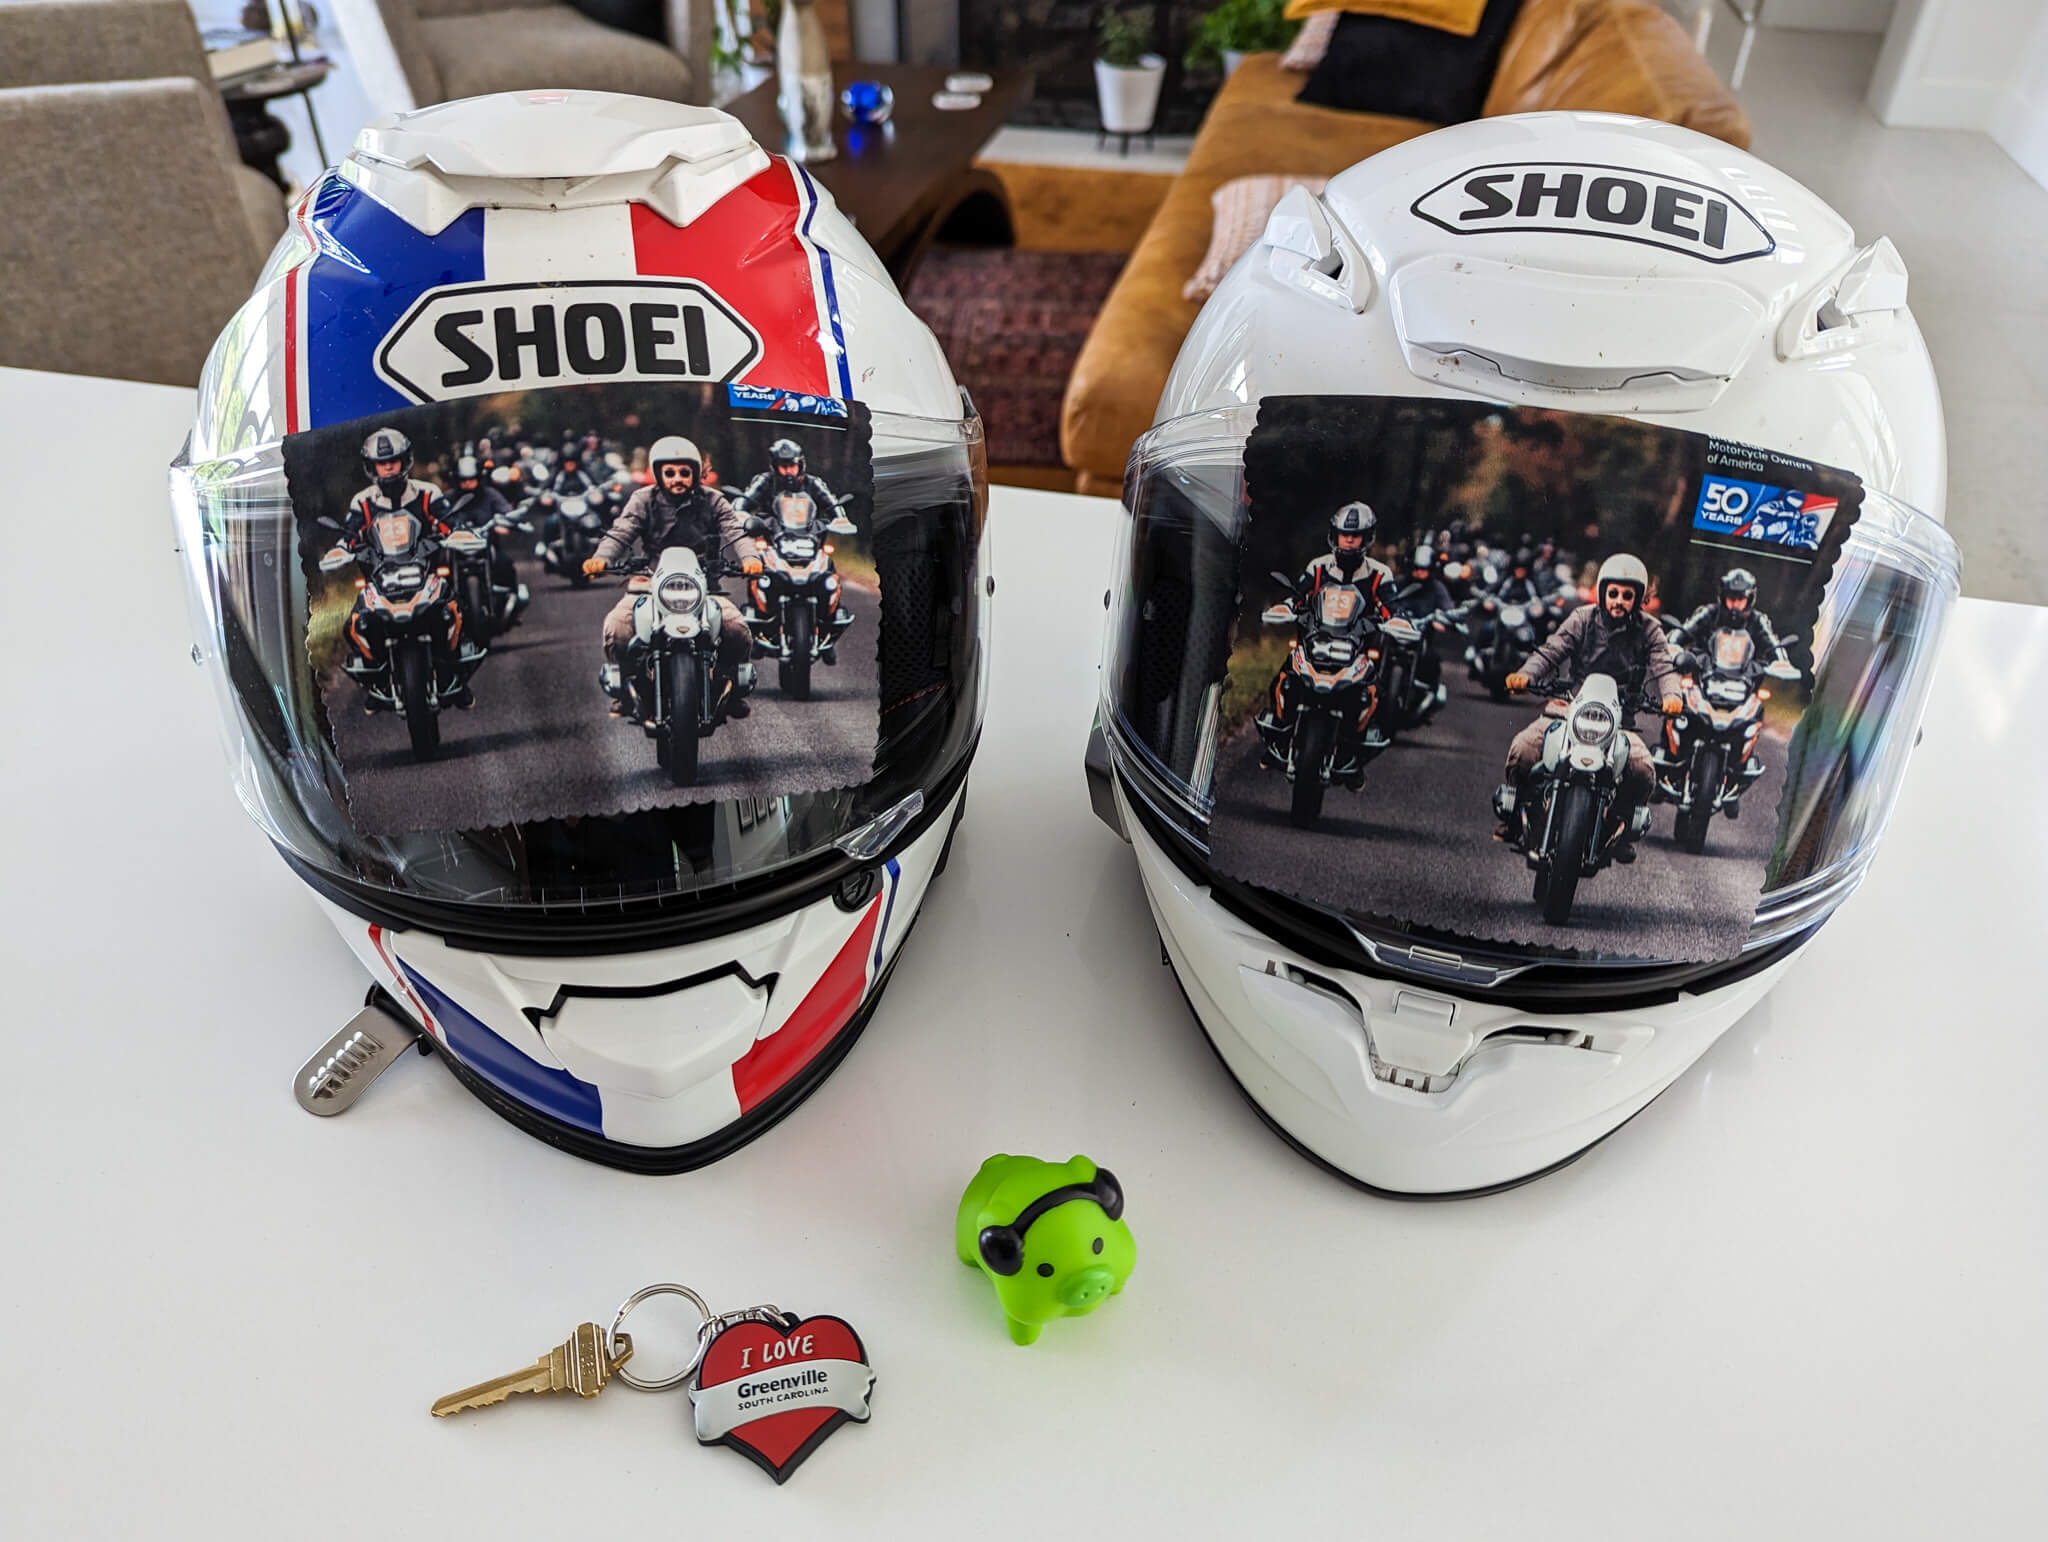 Pair of SHOEI motorcyle helments with images of cyclists on their visors